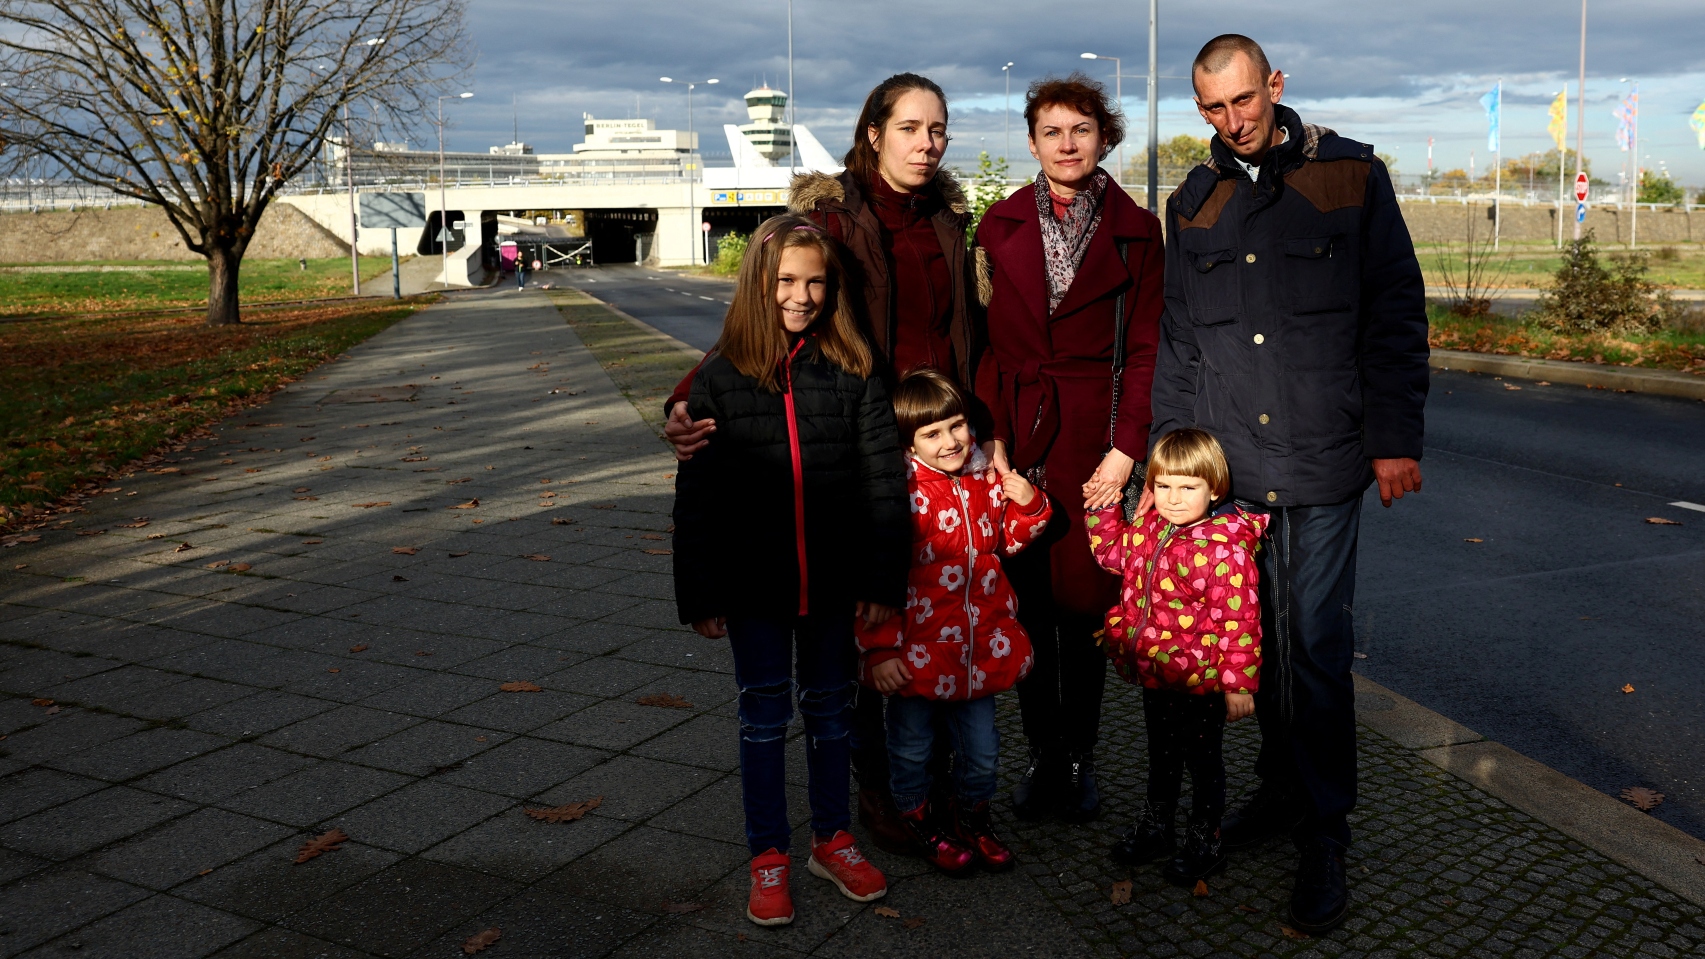 Ivan and Natalia Dombrovskyi with their children and his sister Natalia Kovtun who was fleeing from Zaporizhzhia last week, pose for a family picture outside Tegel airport./Lisi Niesner/Reuters